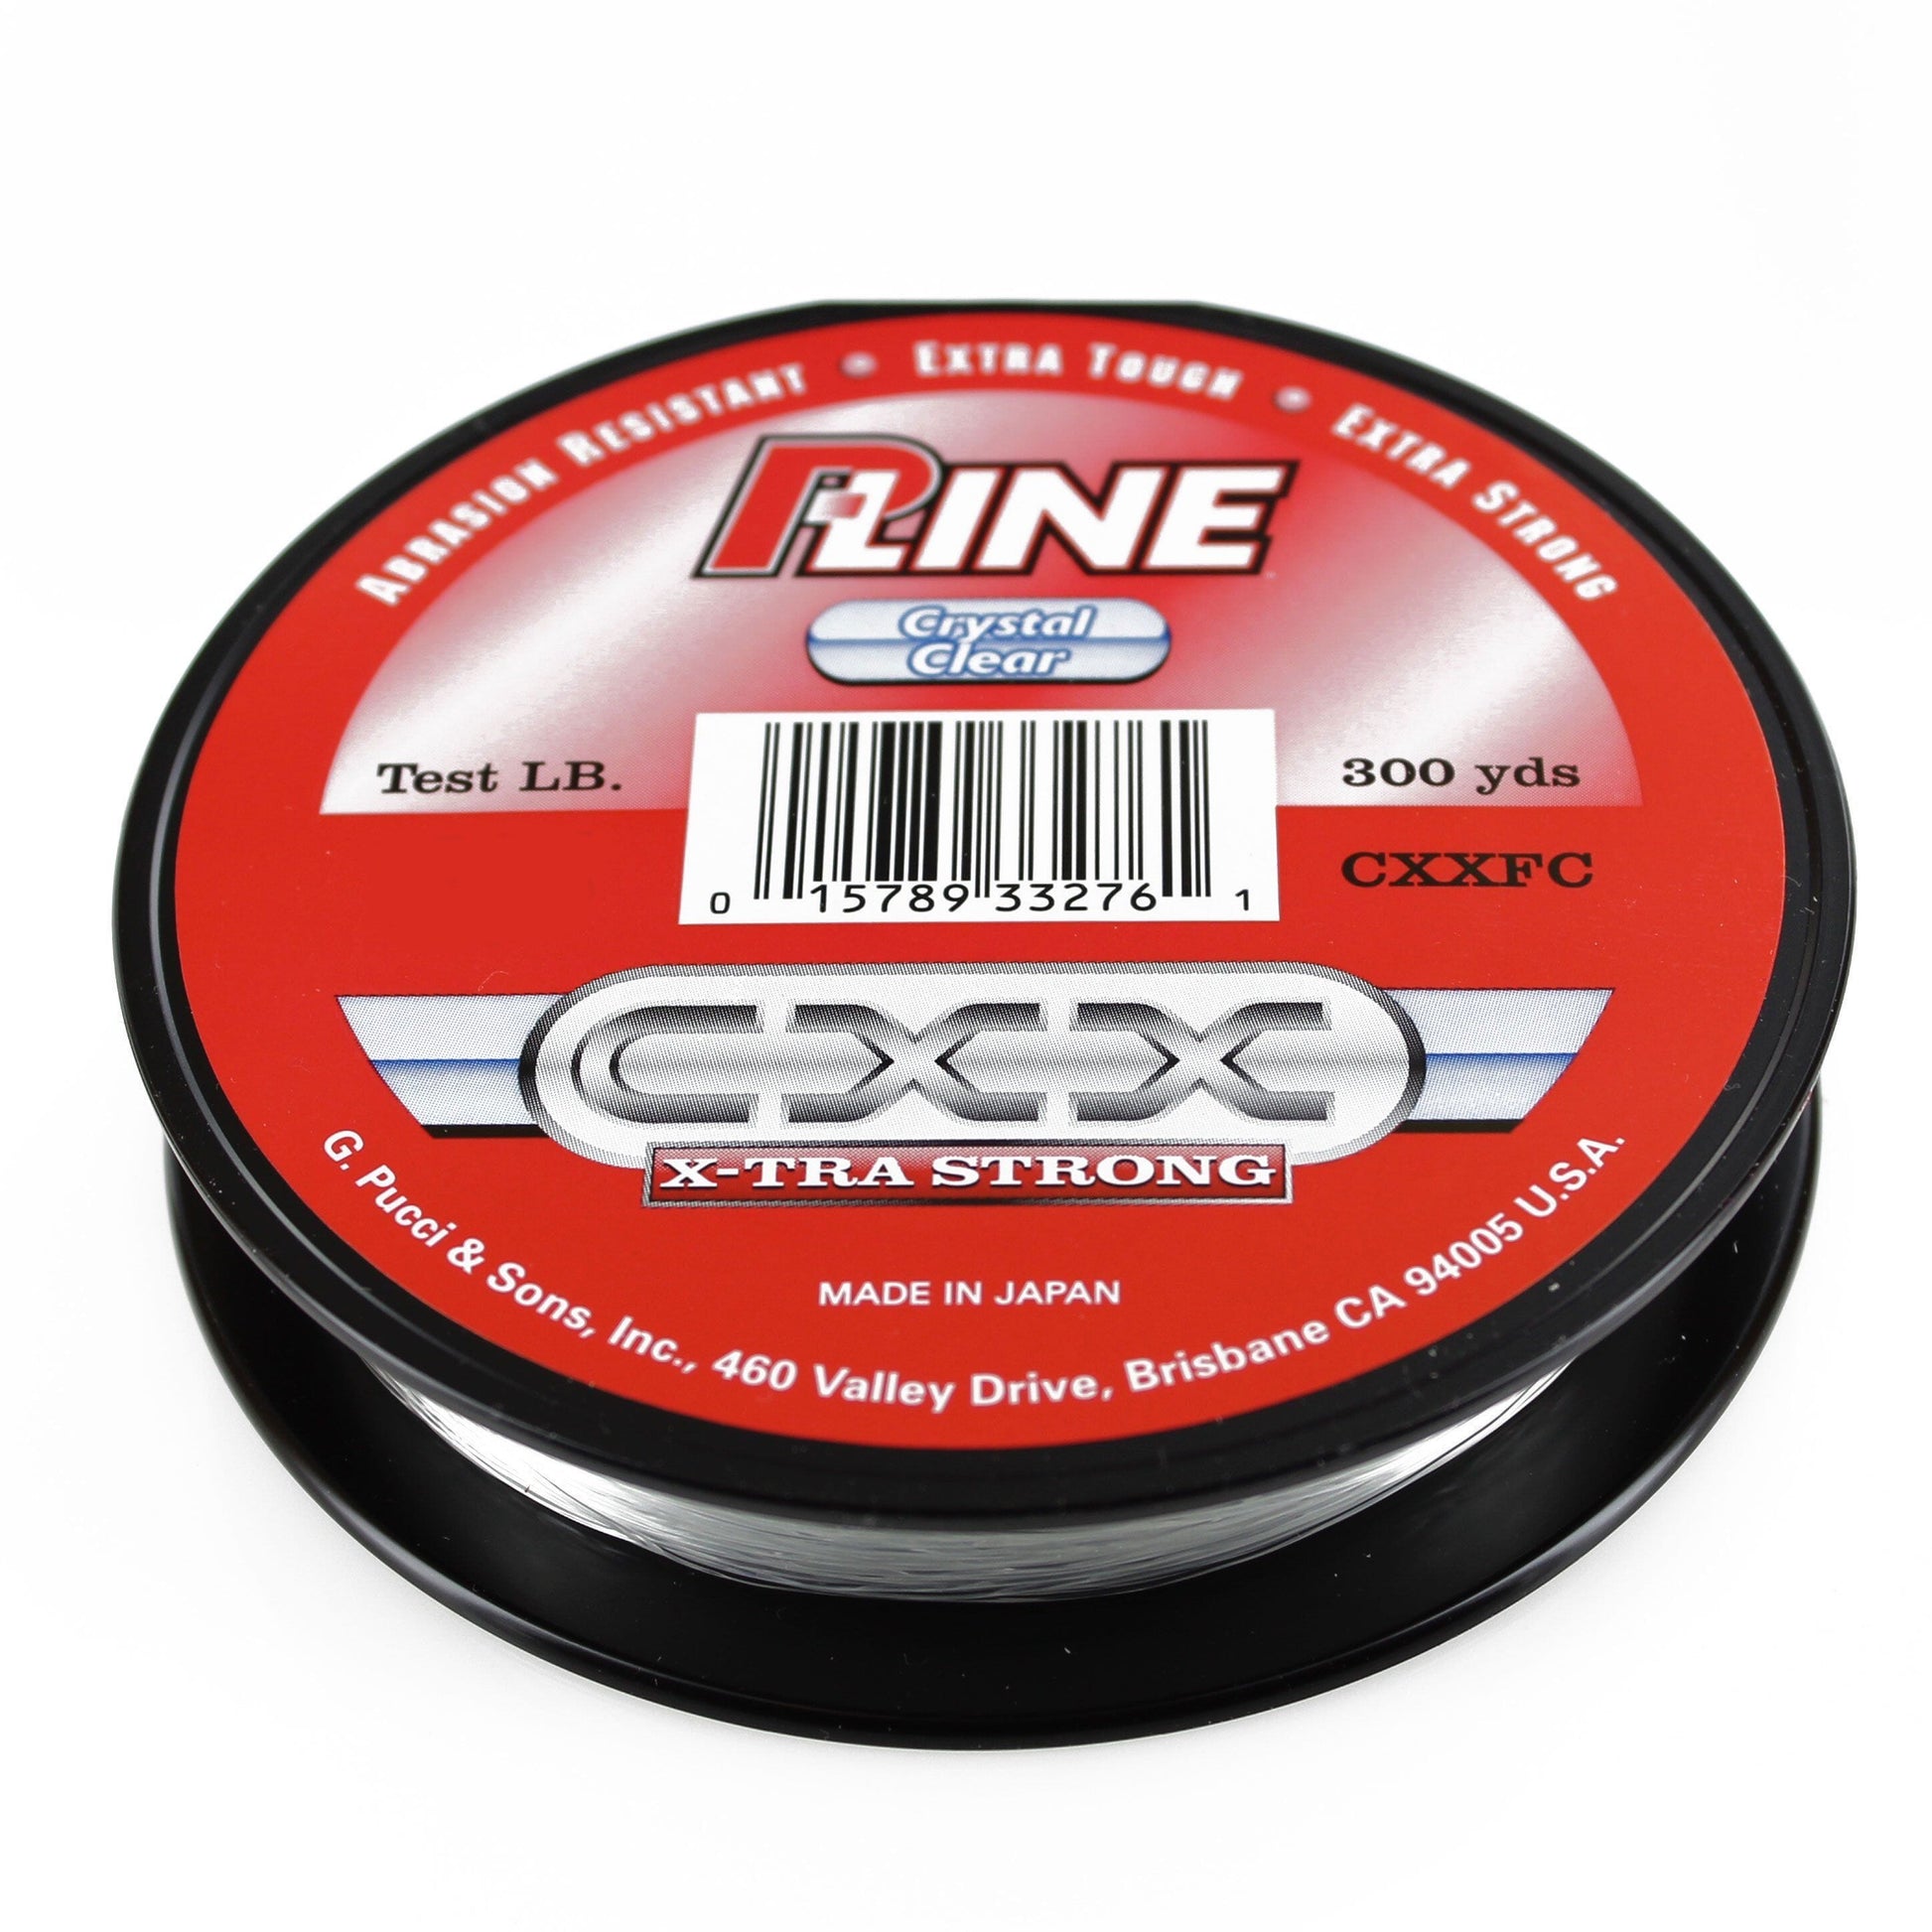 P-Line CXX X-tra Strong | 300 Yards | Crystal Clear 15 lbs.